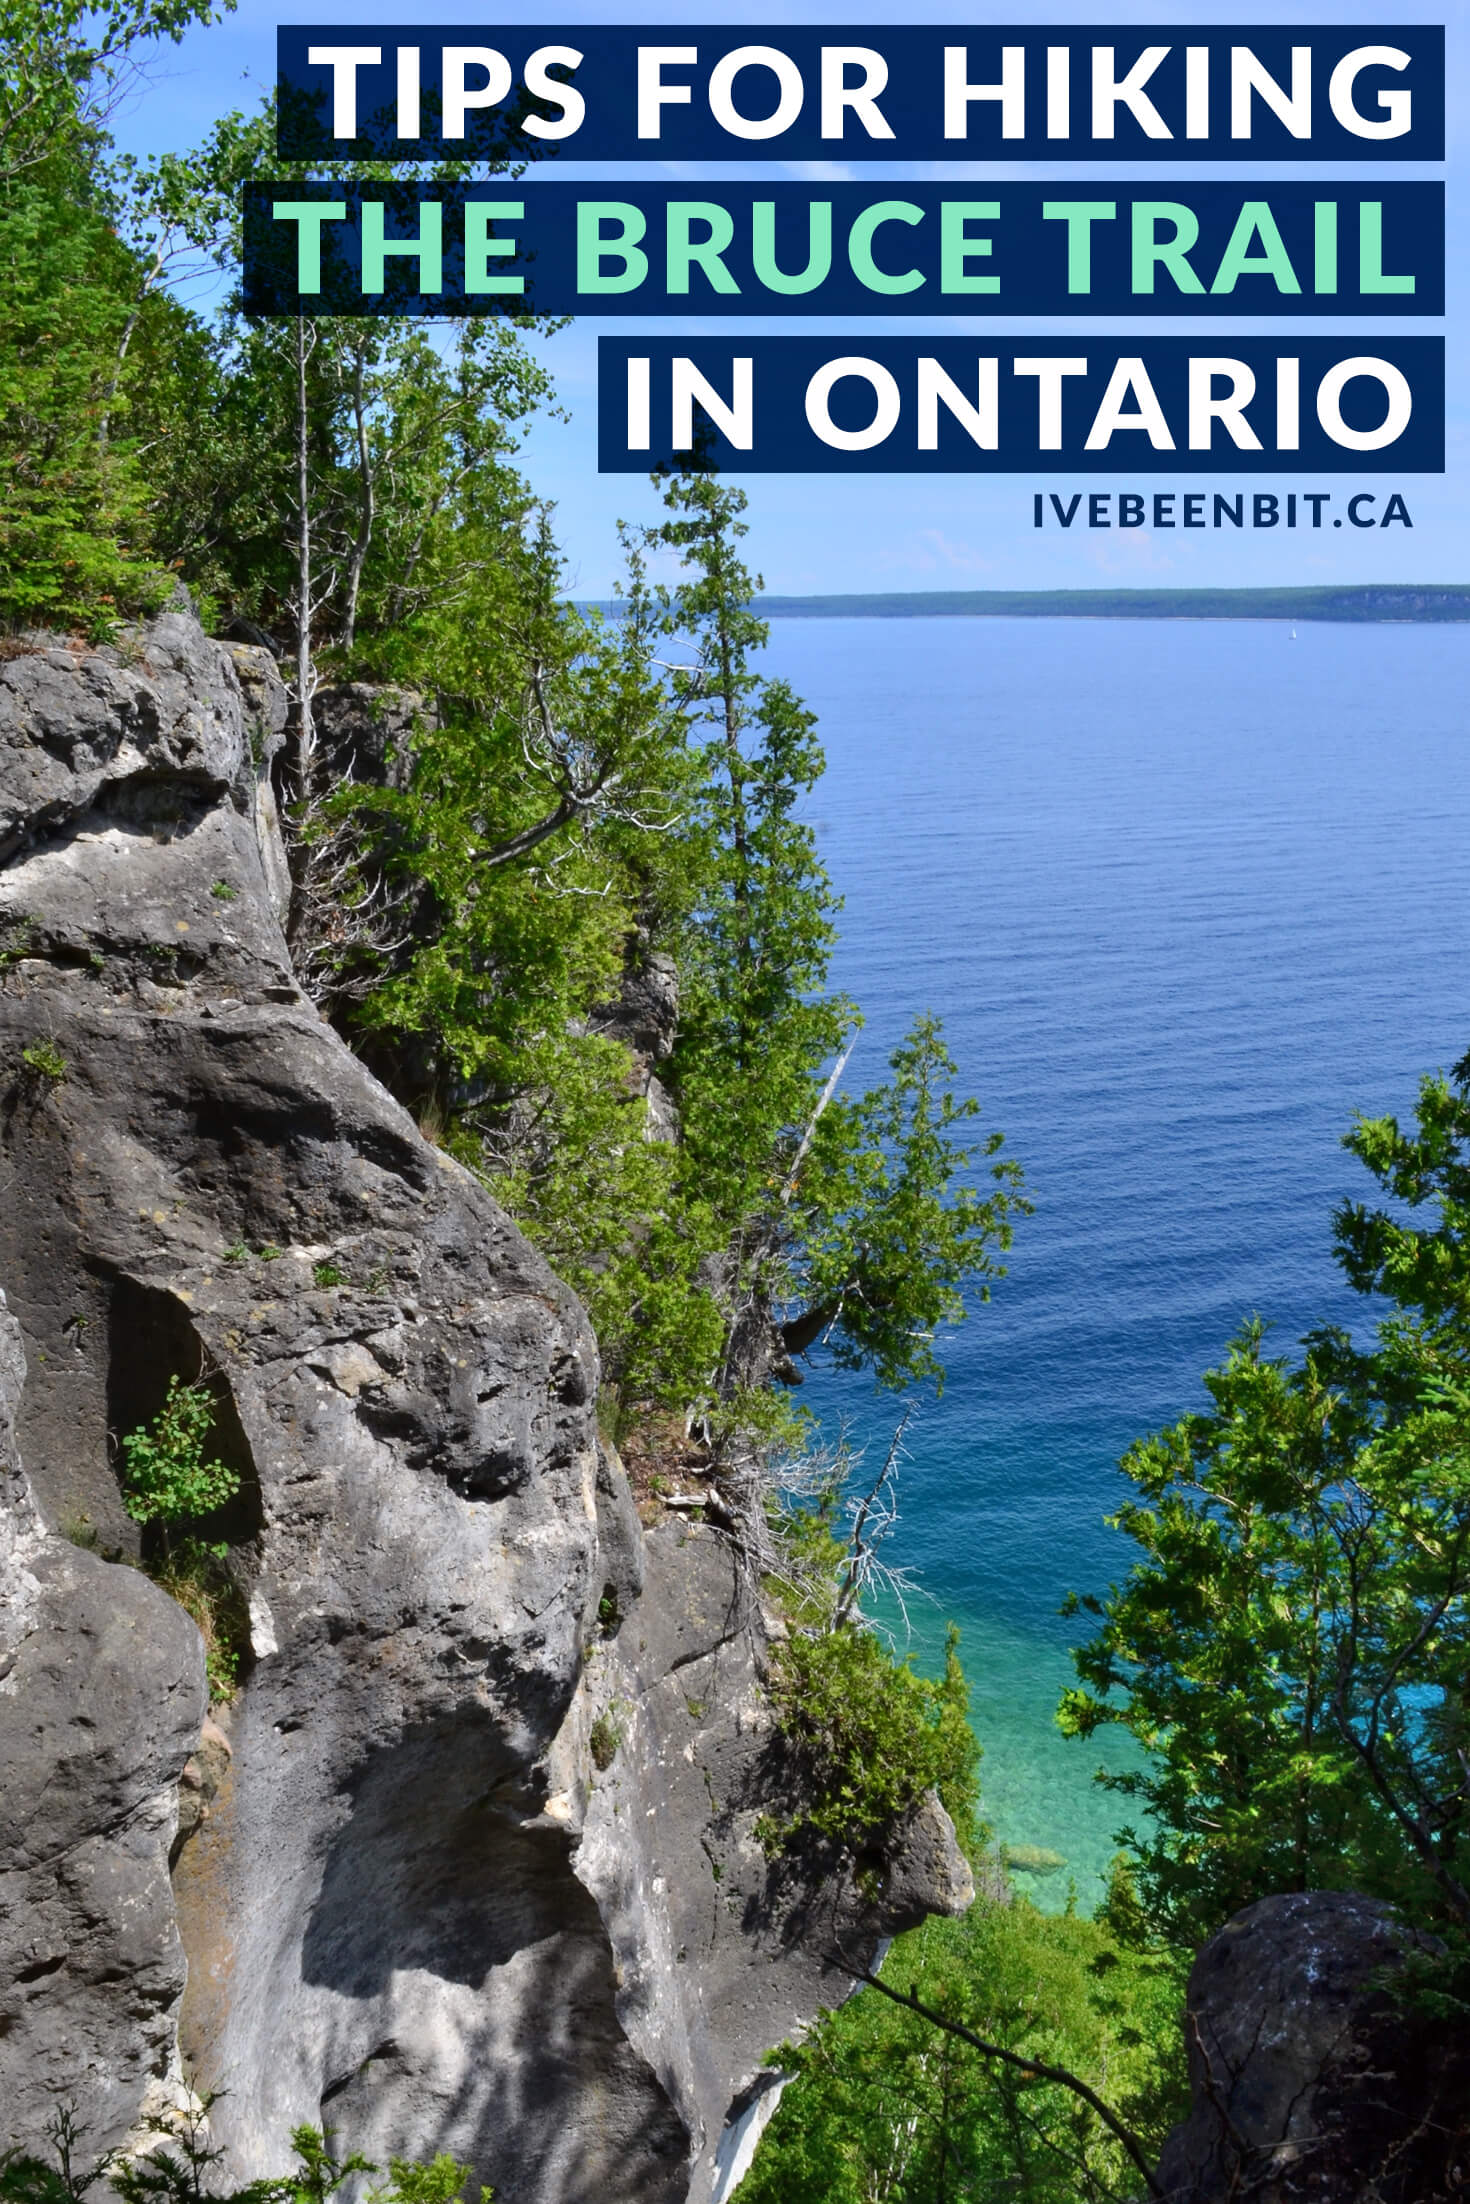 Hiking The Bruce Trail Your Guide to Ontario's Top Trail » I've Been